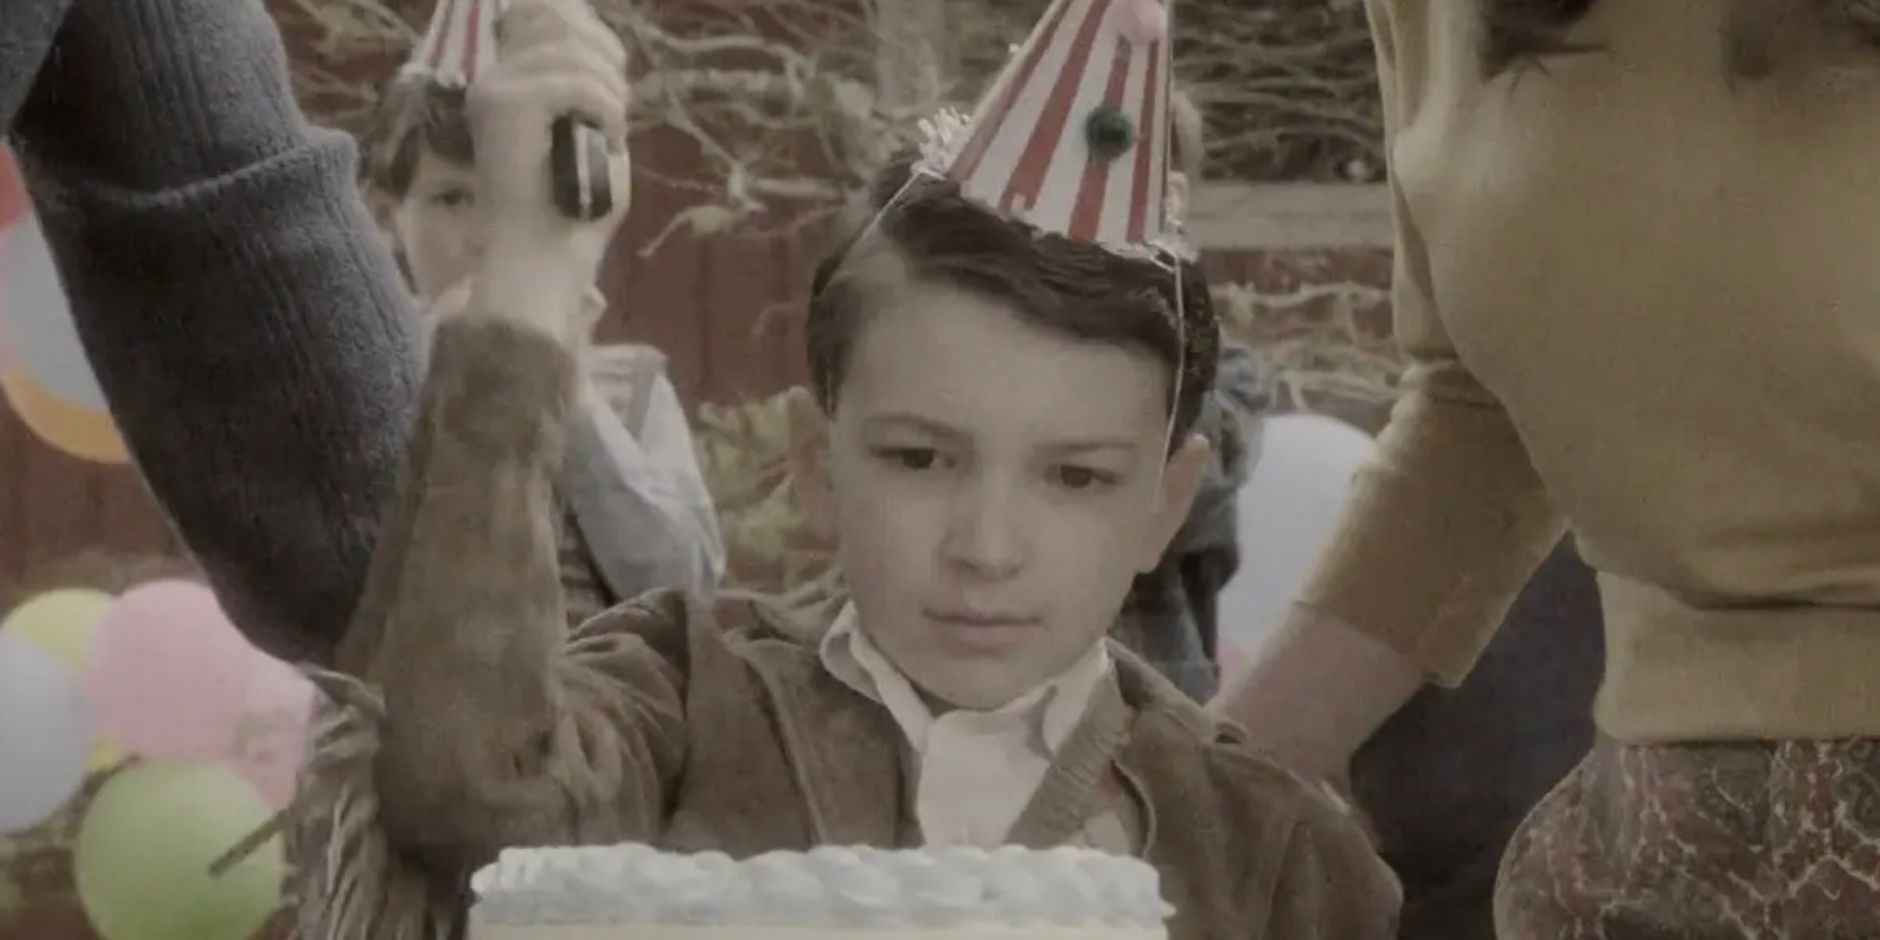 A young Charles Lee Ray using a knife on his cake in Chuckey season 1 flashback